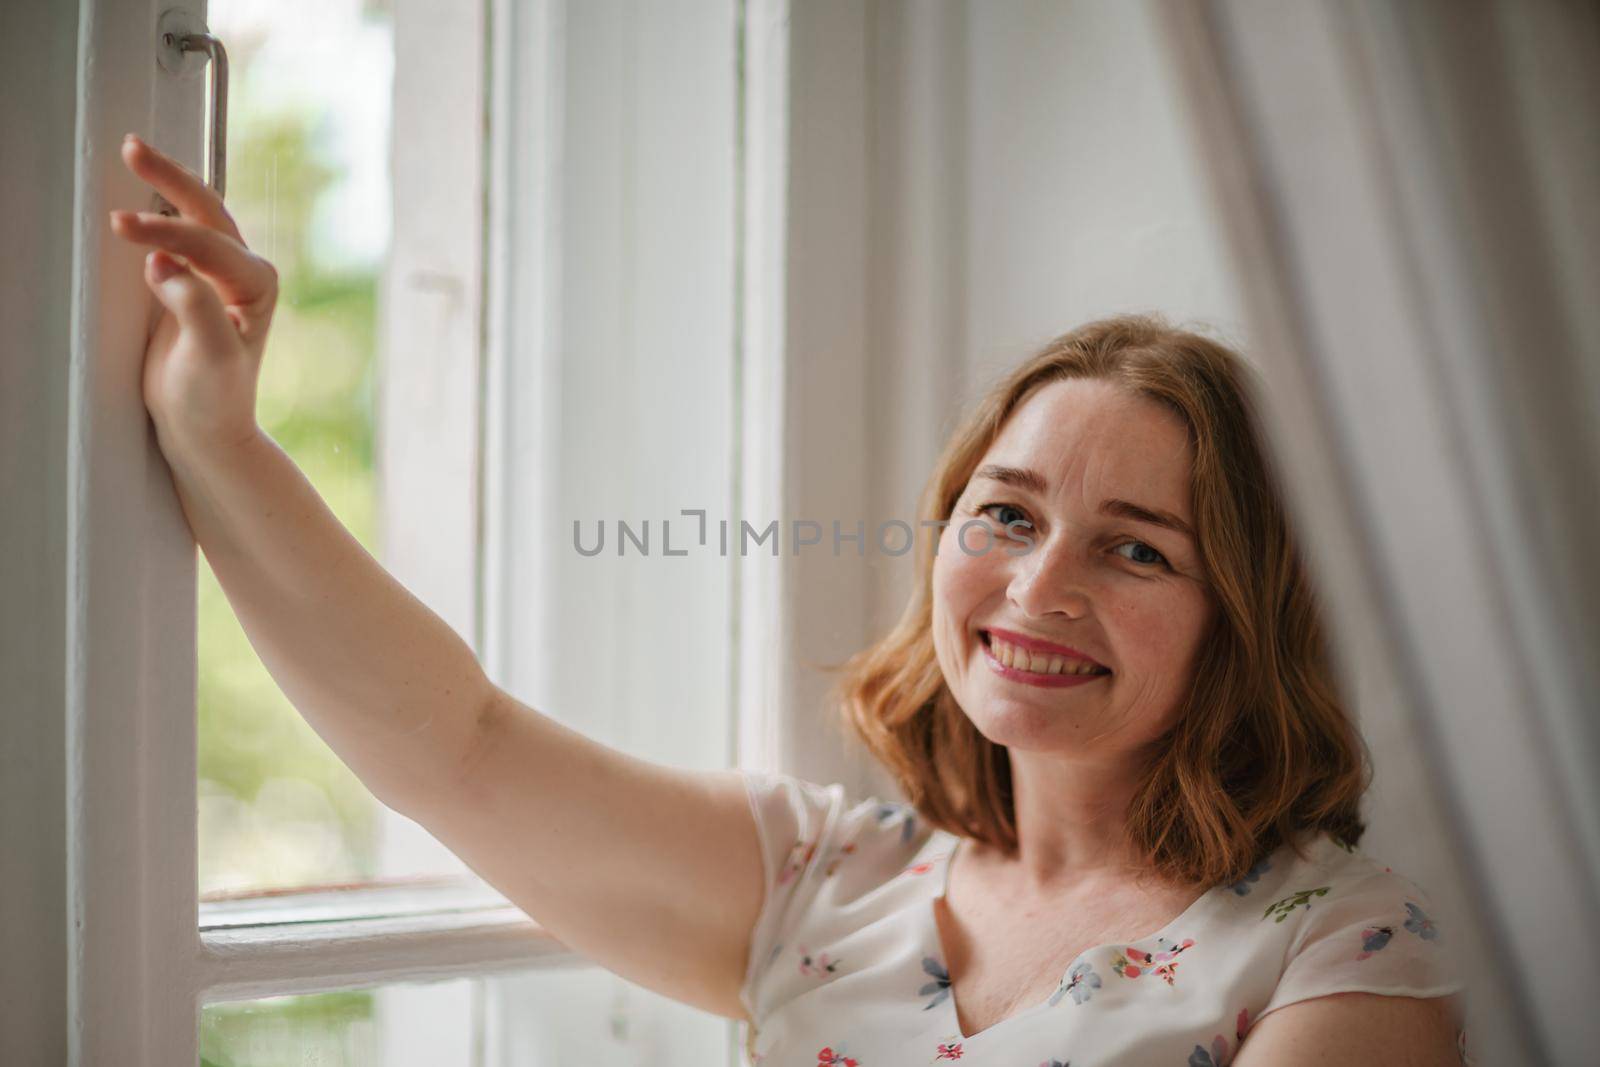 A middle-aged woman in a cream dress sits mysteriously and looks out the window on the windowsill. Green trees outside